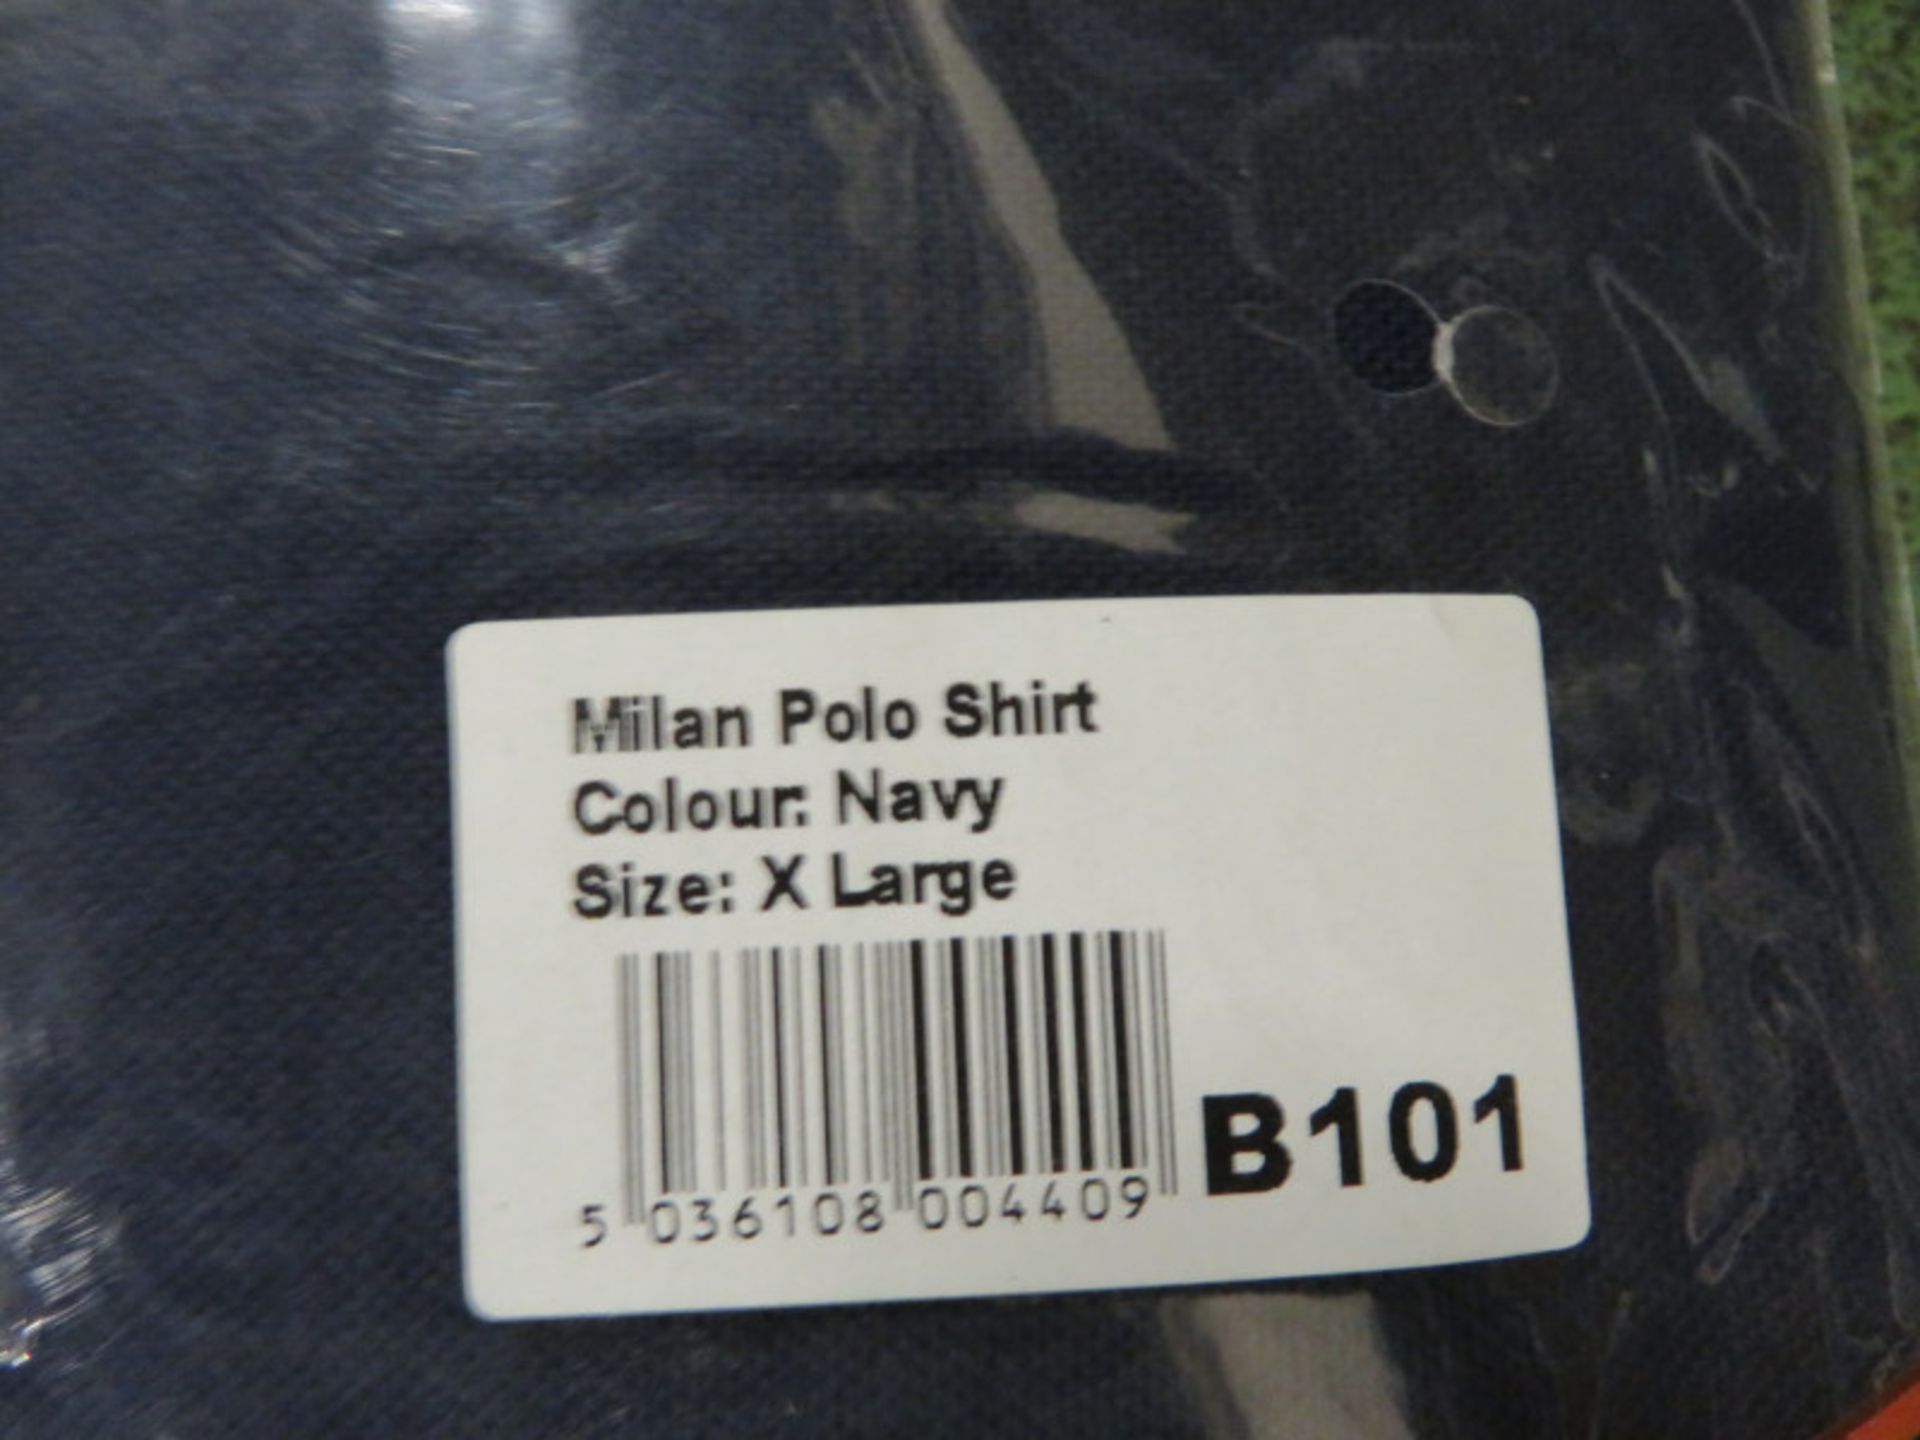 Portwest Liverpool Boiler suits - medium Navy x3, Standard coats Navy small x5, Milan Polo - Image 3 of 3